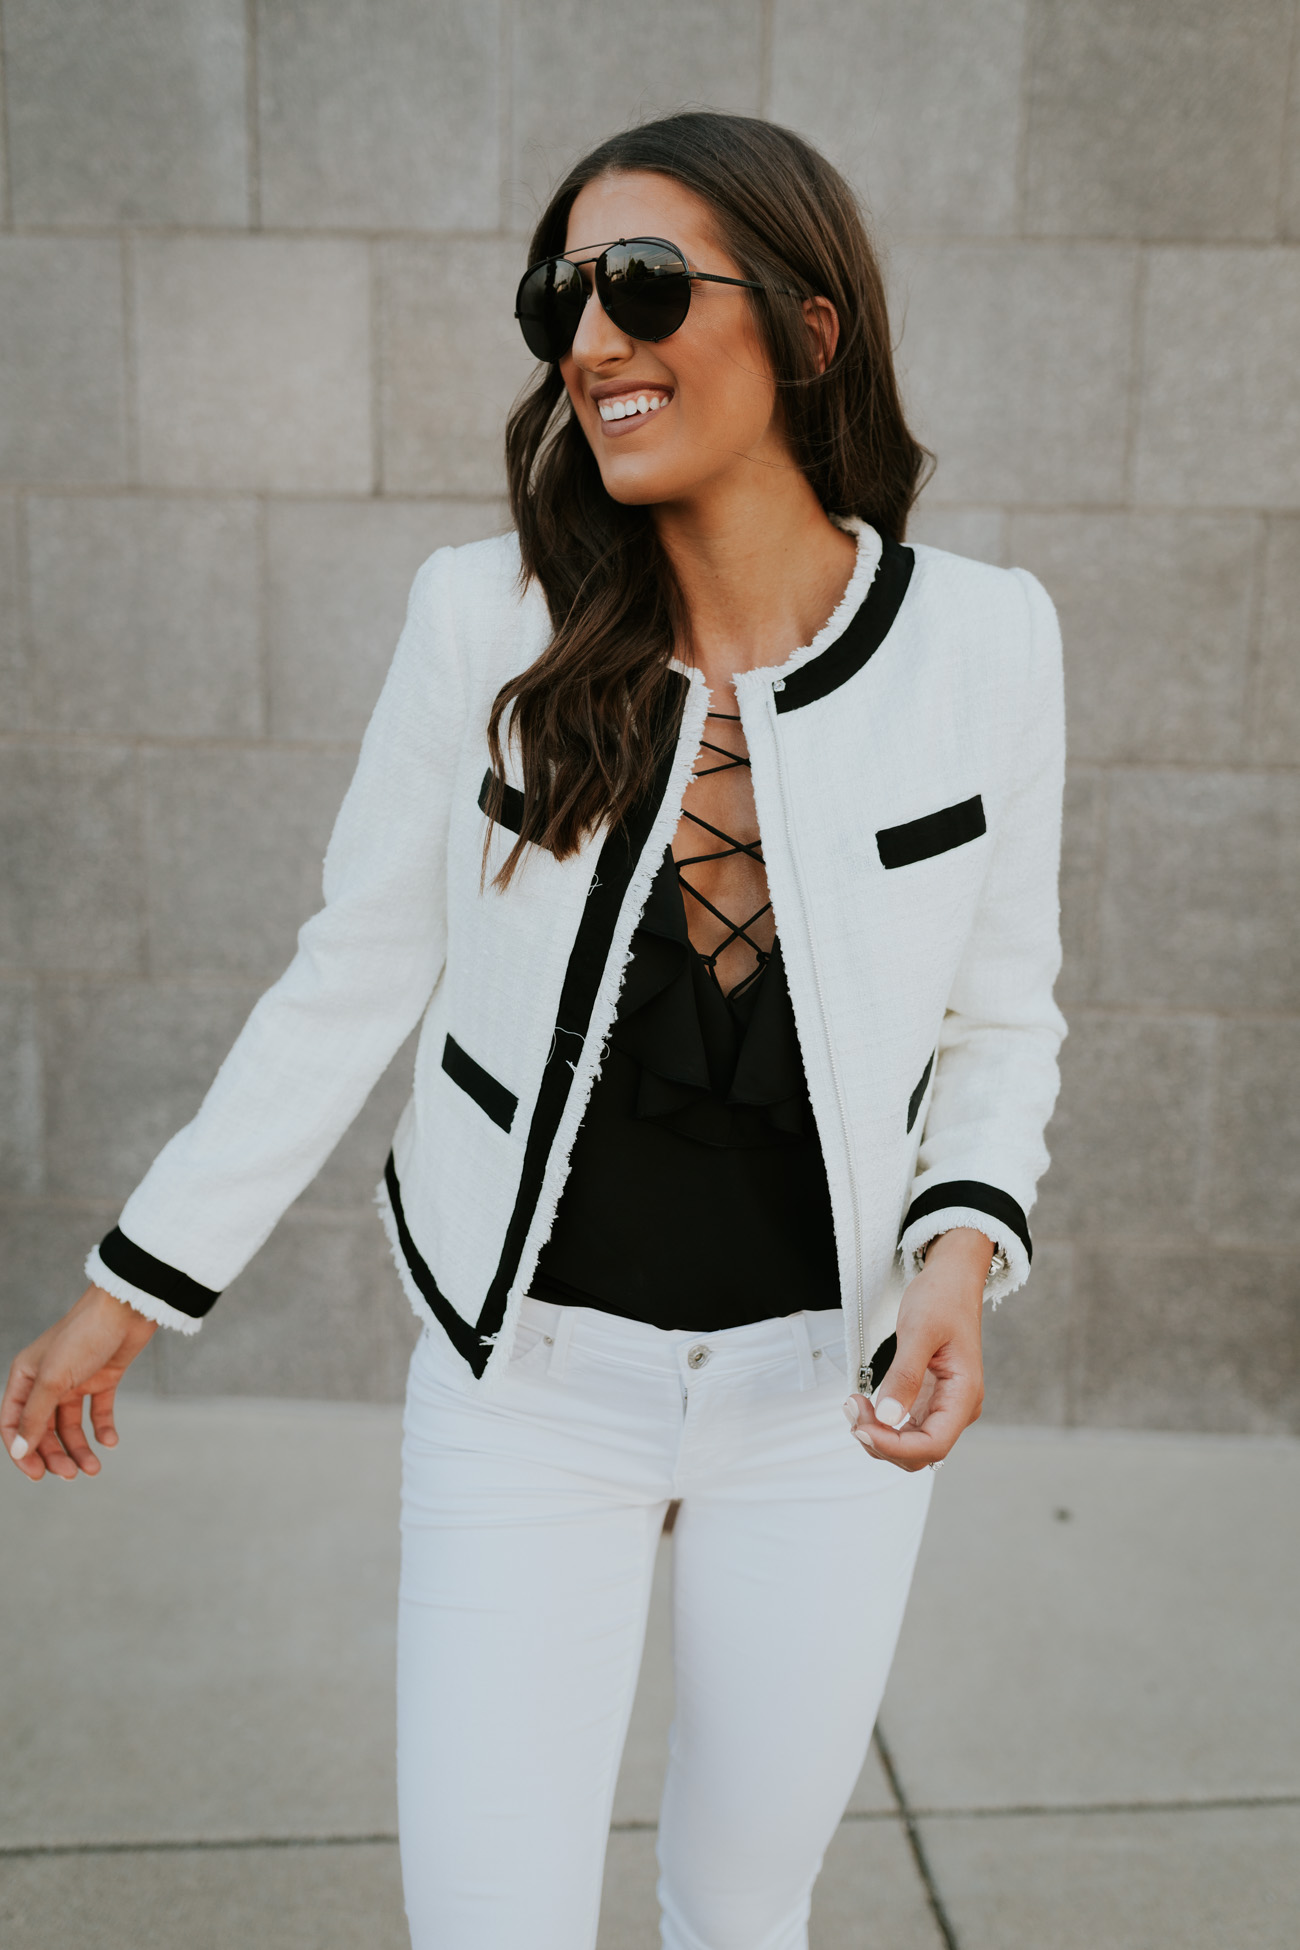 lace up cami, wayf lace up ruffle cami, preppy style, preppy jacket, tweed jacket, cece tweed jacket, 2018 nordstrom anniversary sale public access, shop nordstrom, nordstrom shoes, nordstrom dresses, nordstrom handbag sale, nordstrom anniversary sale dates, Nordstrom Anniversary Sale 2018, nordstrom anniversary sale picks, nordstrom anniversary sale catalog, sale picks for nordstrom anniversary sale 2018, information on nordstrom anniversary sale, nordstrom credit card, nordstrom debit card, nordstrom rewards, nordstrom sale, nordstrom anniversary sale finds, nsale finds, nsale picks, nike on sale, cute fall outfit, fall style, fall inspo, fall sale, nordstrom anniversary sale public access, 2018 nordstrom anniversary sale public access // grace wainwright a southern drawl